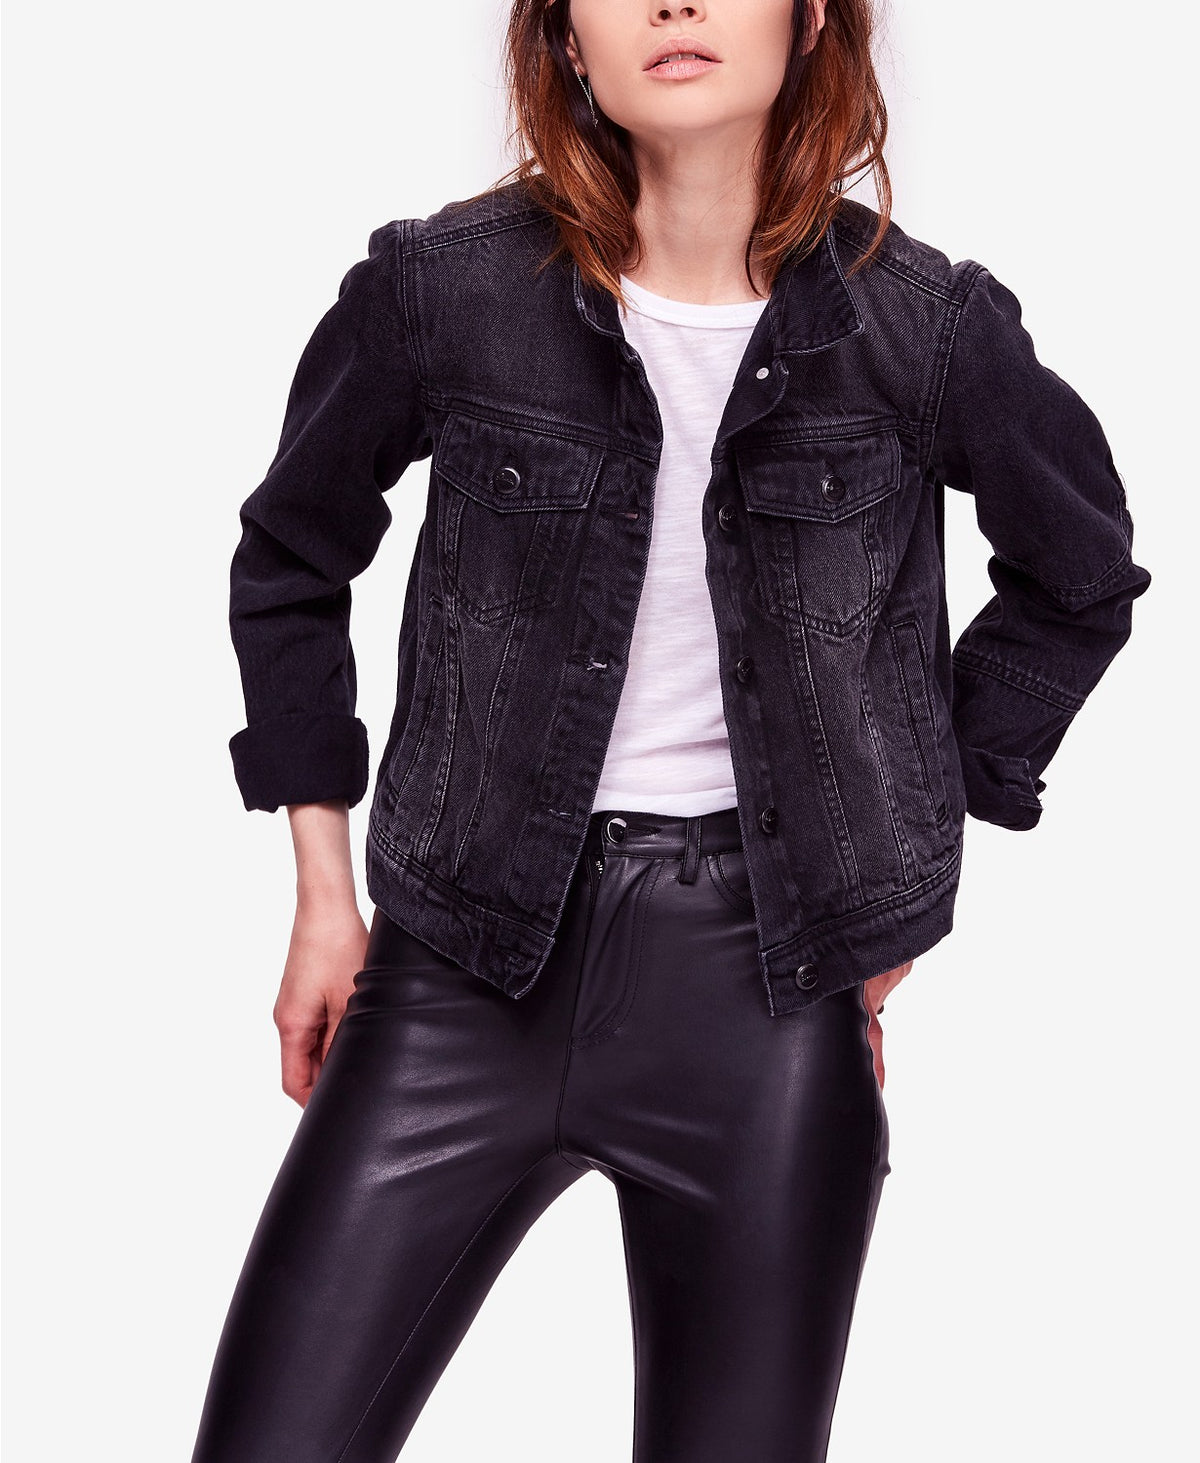 Stylish Women's Black Denim Jacket - Cropped denim jacket with pockets and button closure, worn by a young woman with dark hair in a casual outfit.